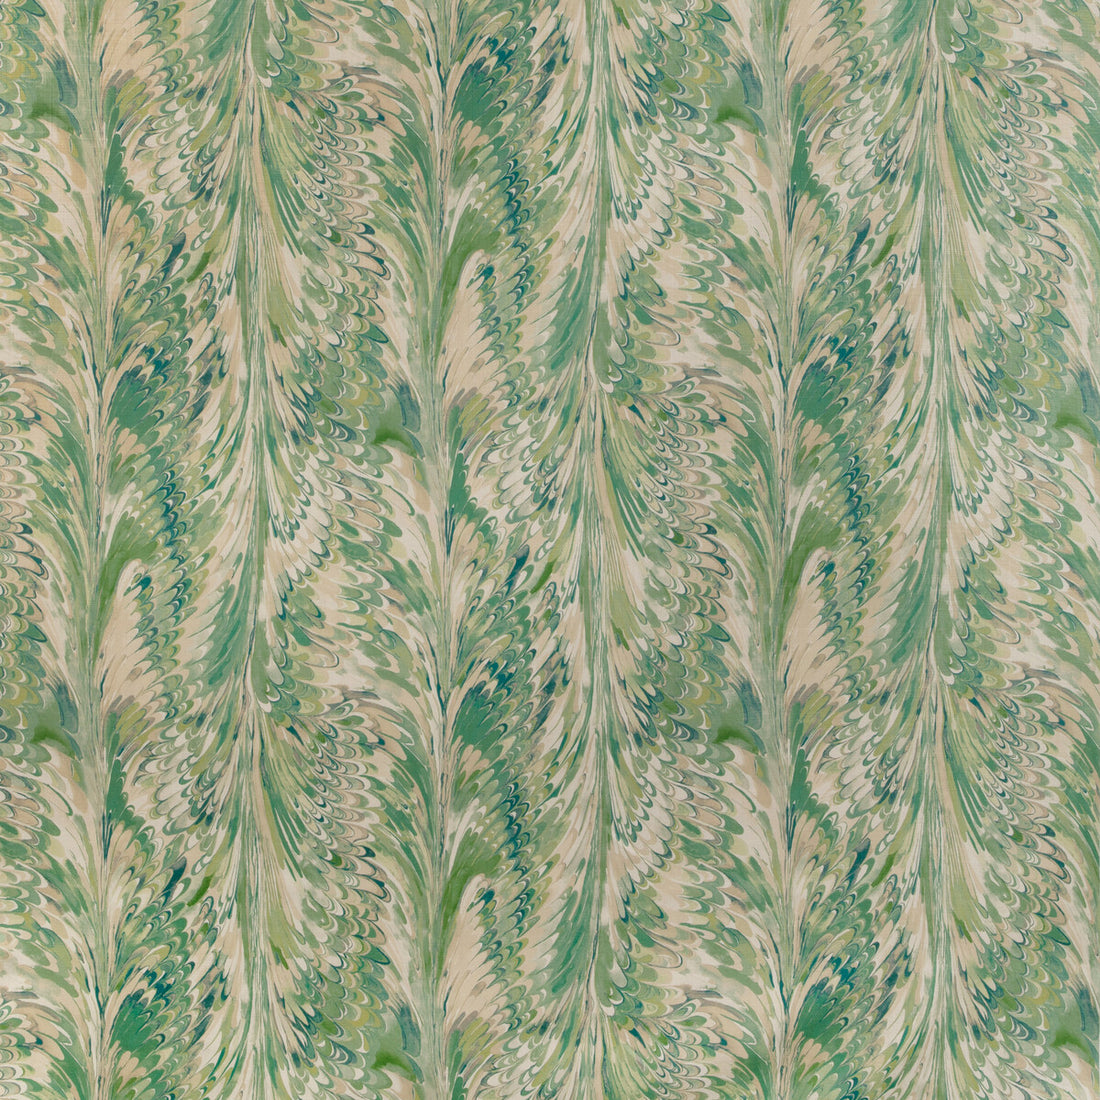 Taplow Print fabric in jade/leaf color - pattern 2019114.33.0 - by Lee Jofa in the Garden Walk collection